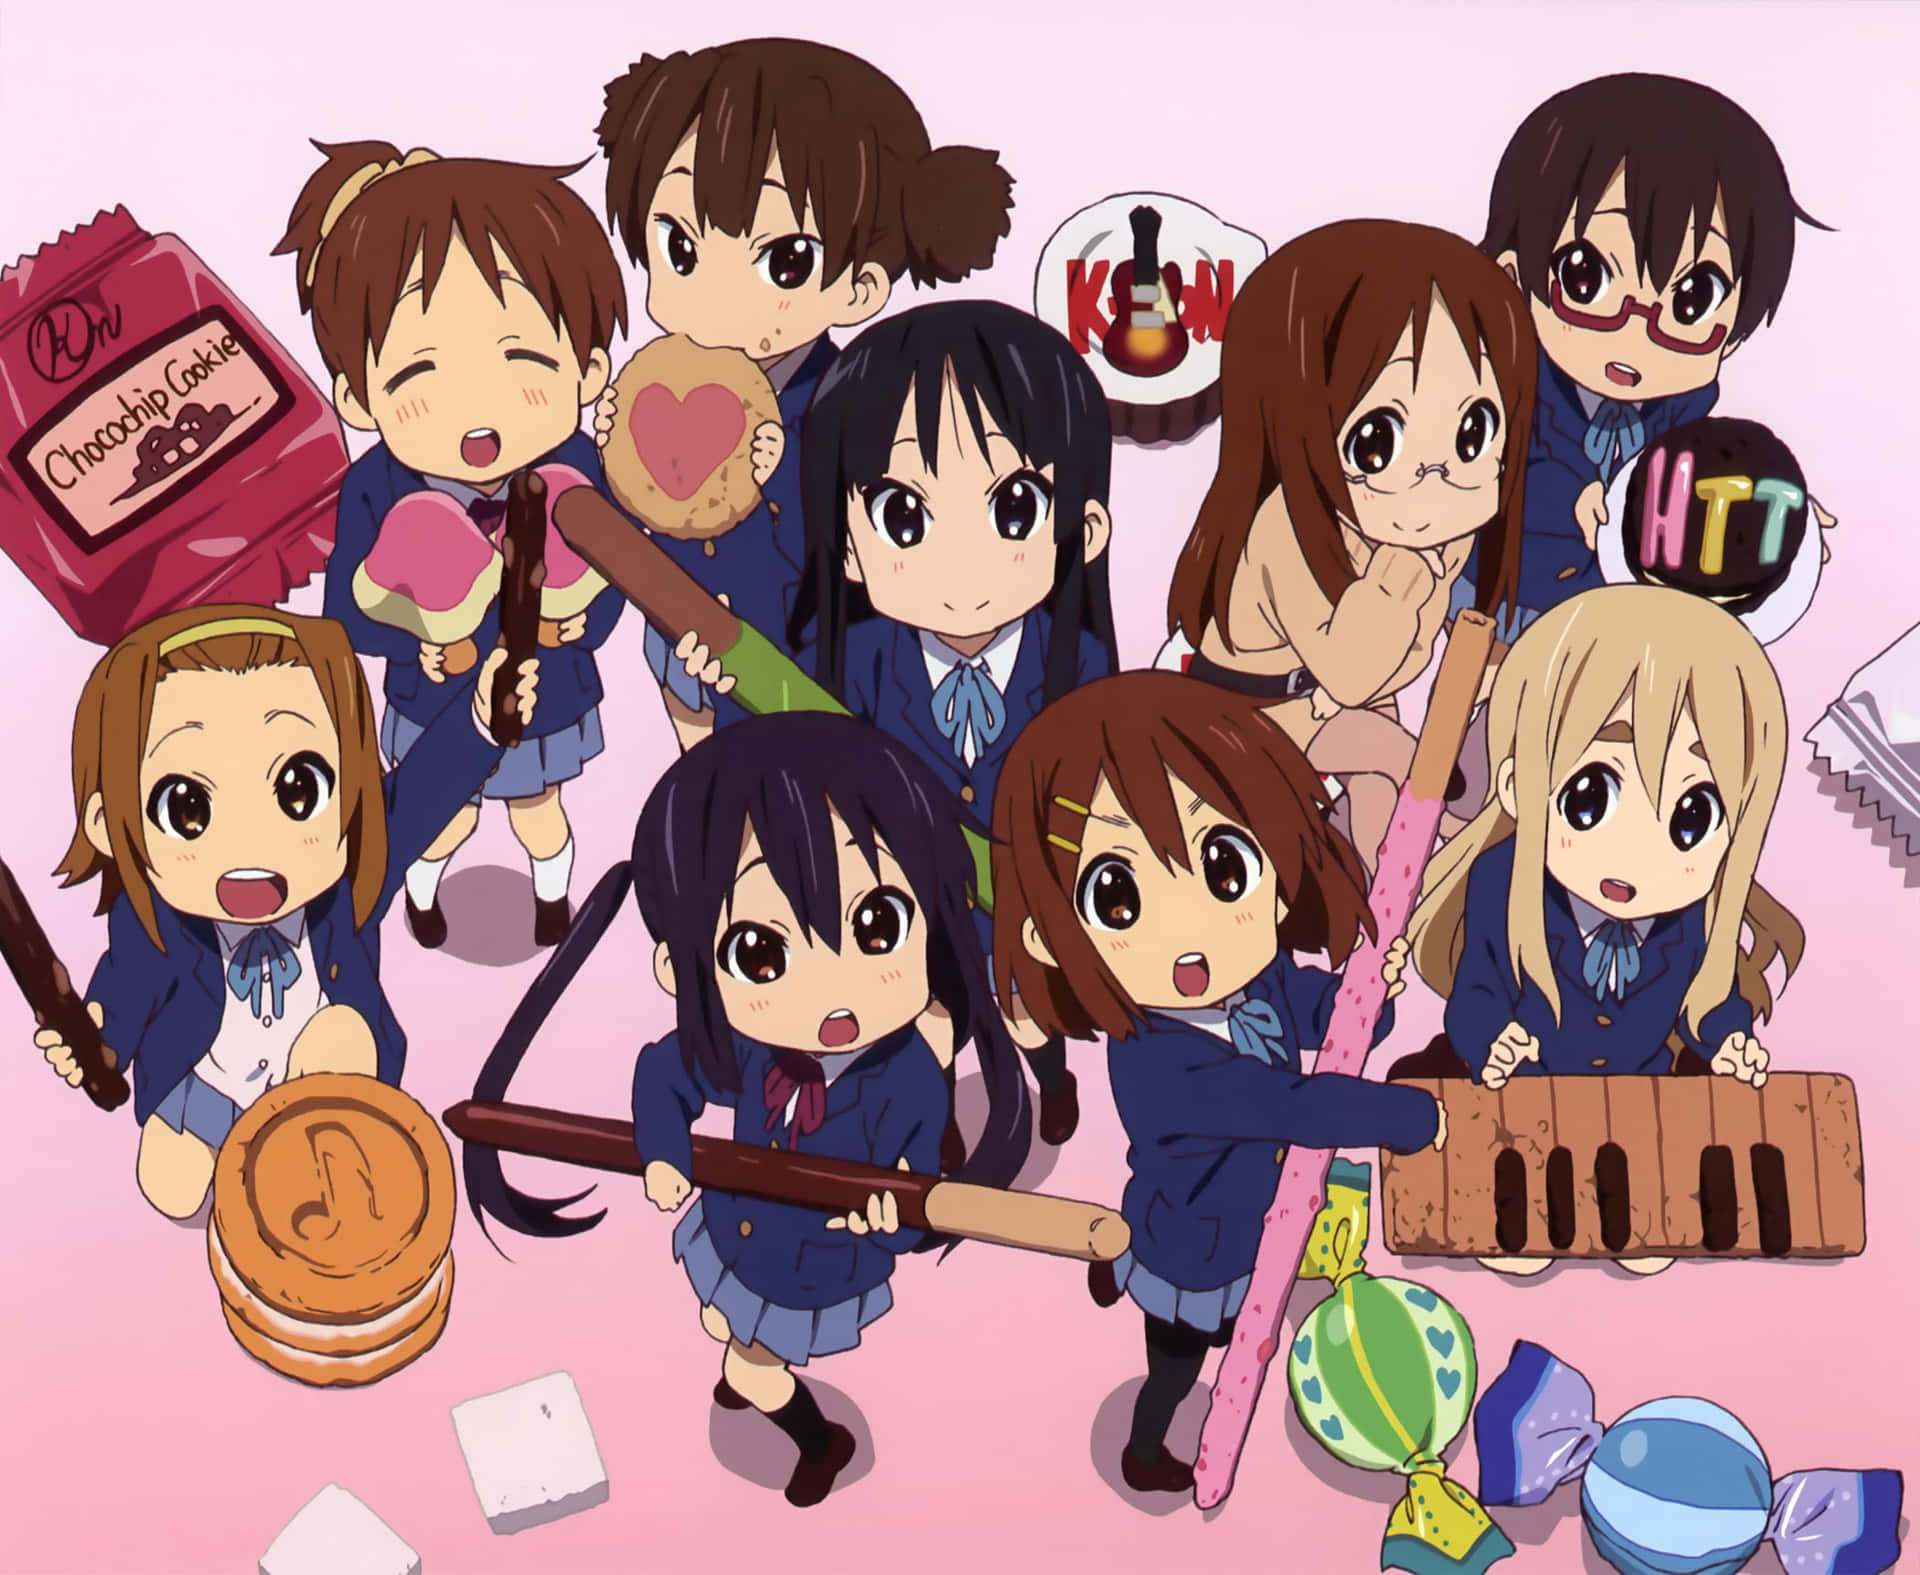 A Group Of Anime Girls Posing With A Variety Of Items